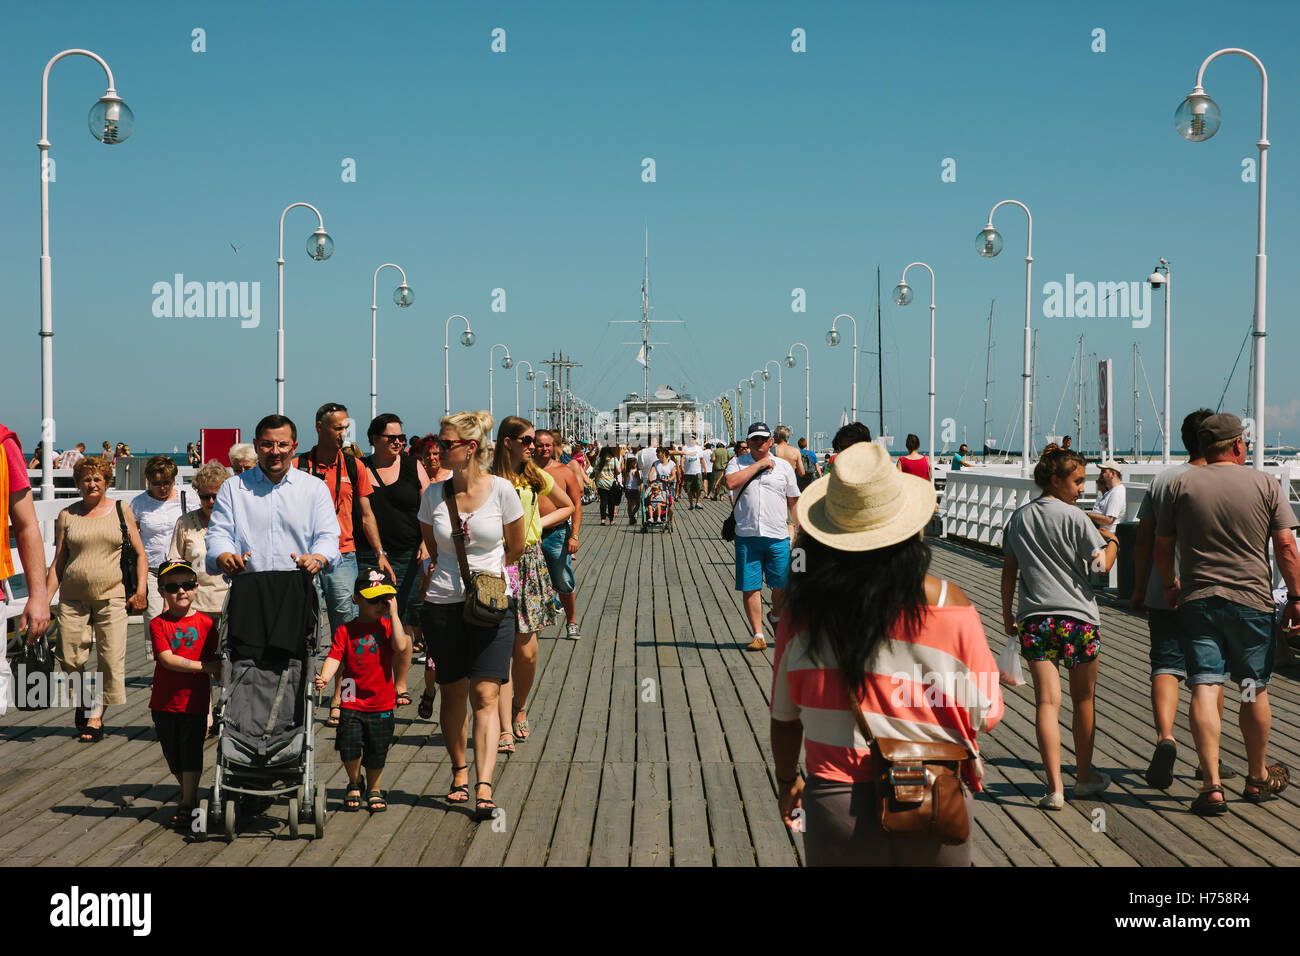 The pier or molo in Sopot, Poland, on a sunny day in the summer with people walking around. Stock Photo